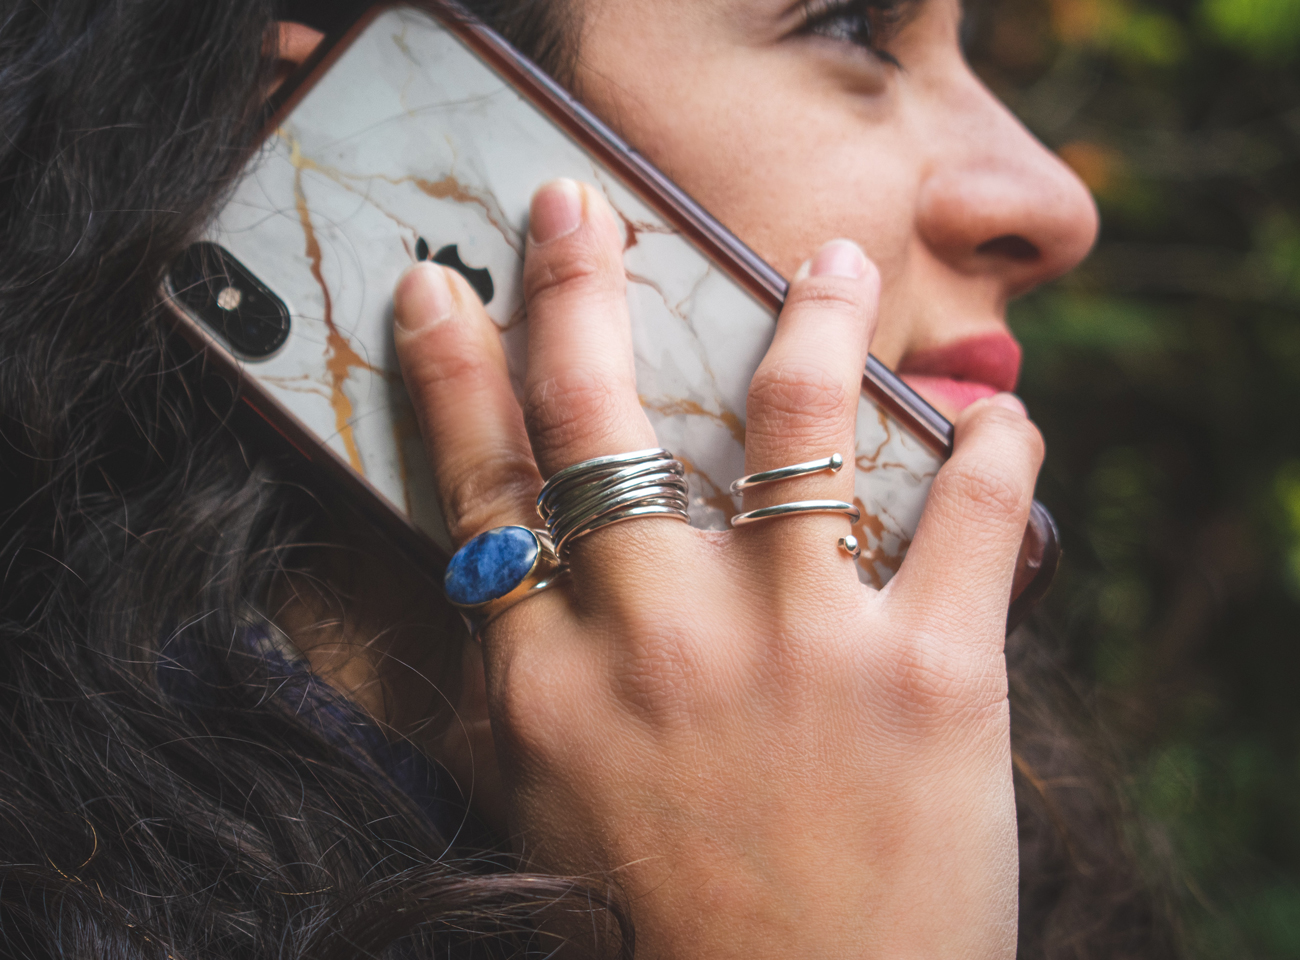 A woman holding an iPhone up to her ear to talk to someone